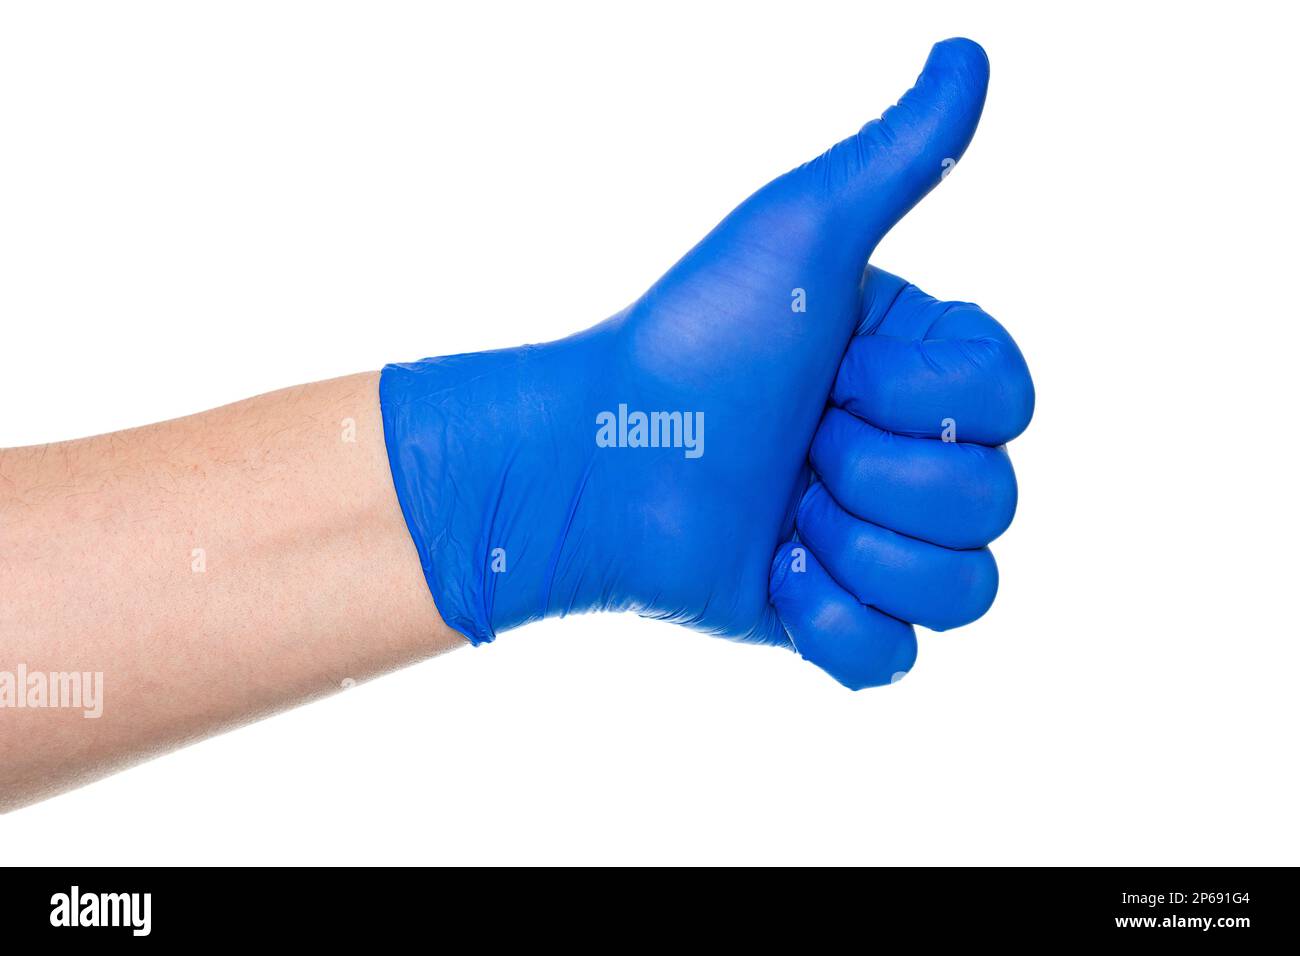 Crop unrecognizable hand of person in blue medical glove showing thumb up against white background Stock Photo